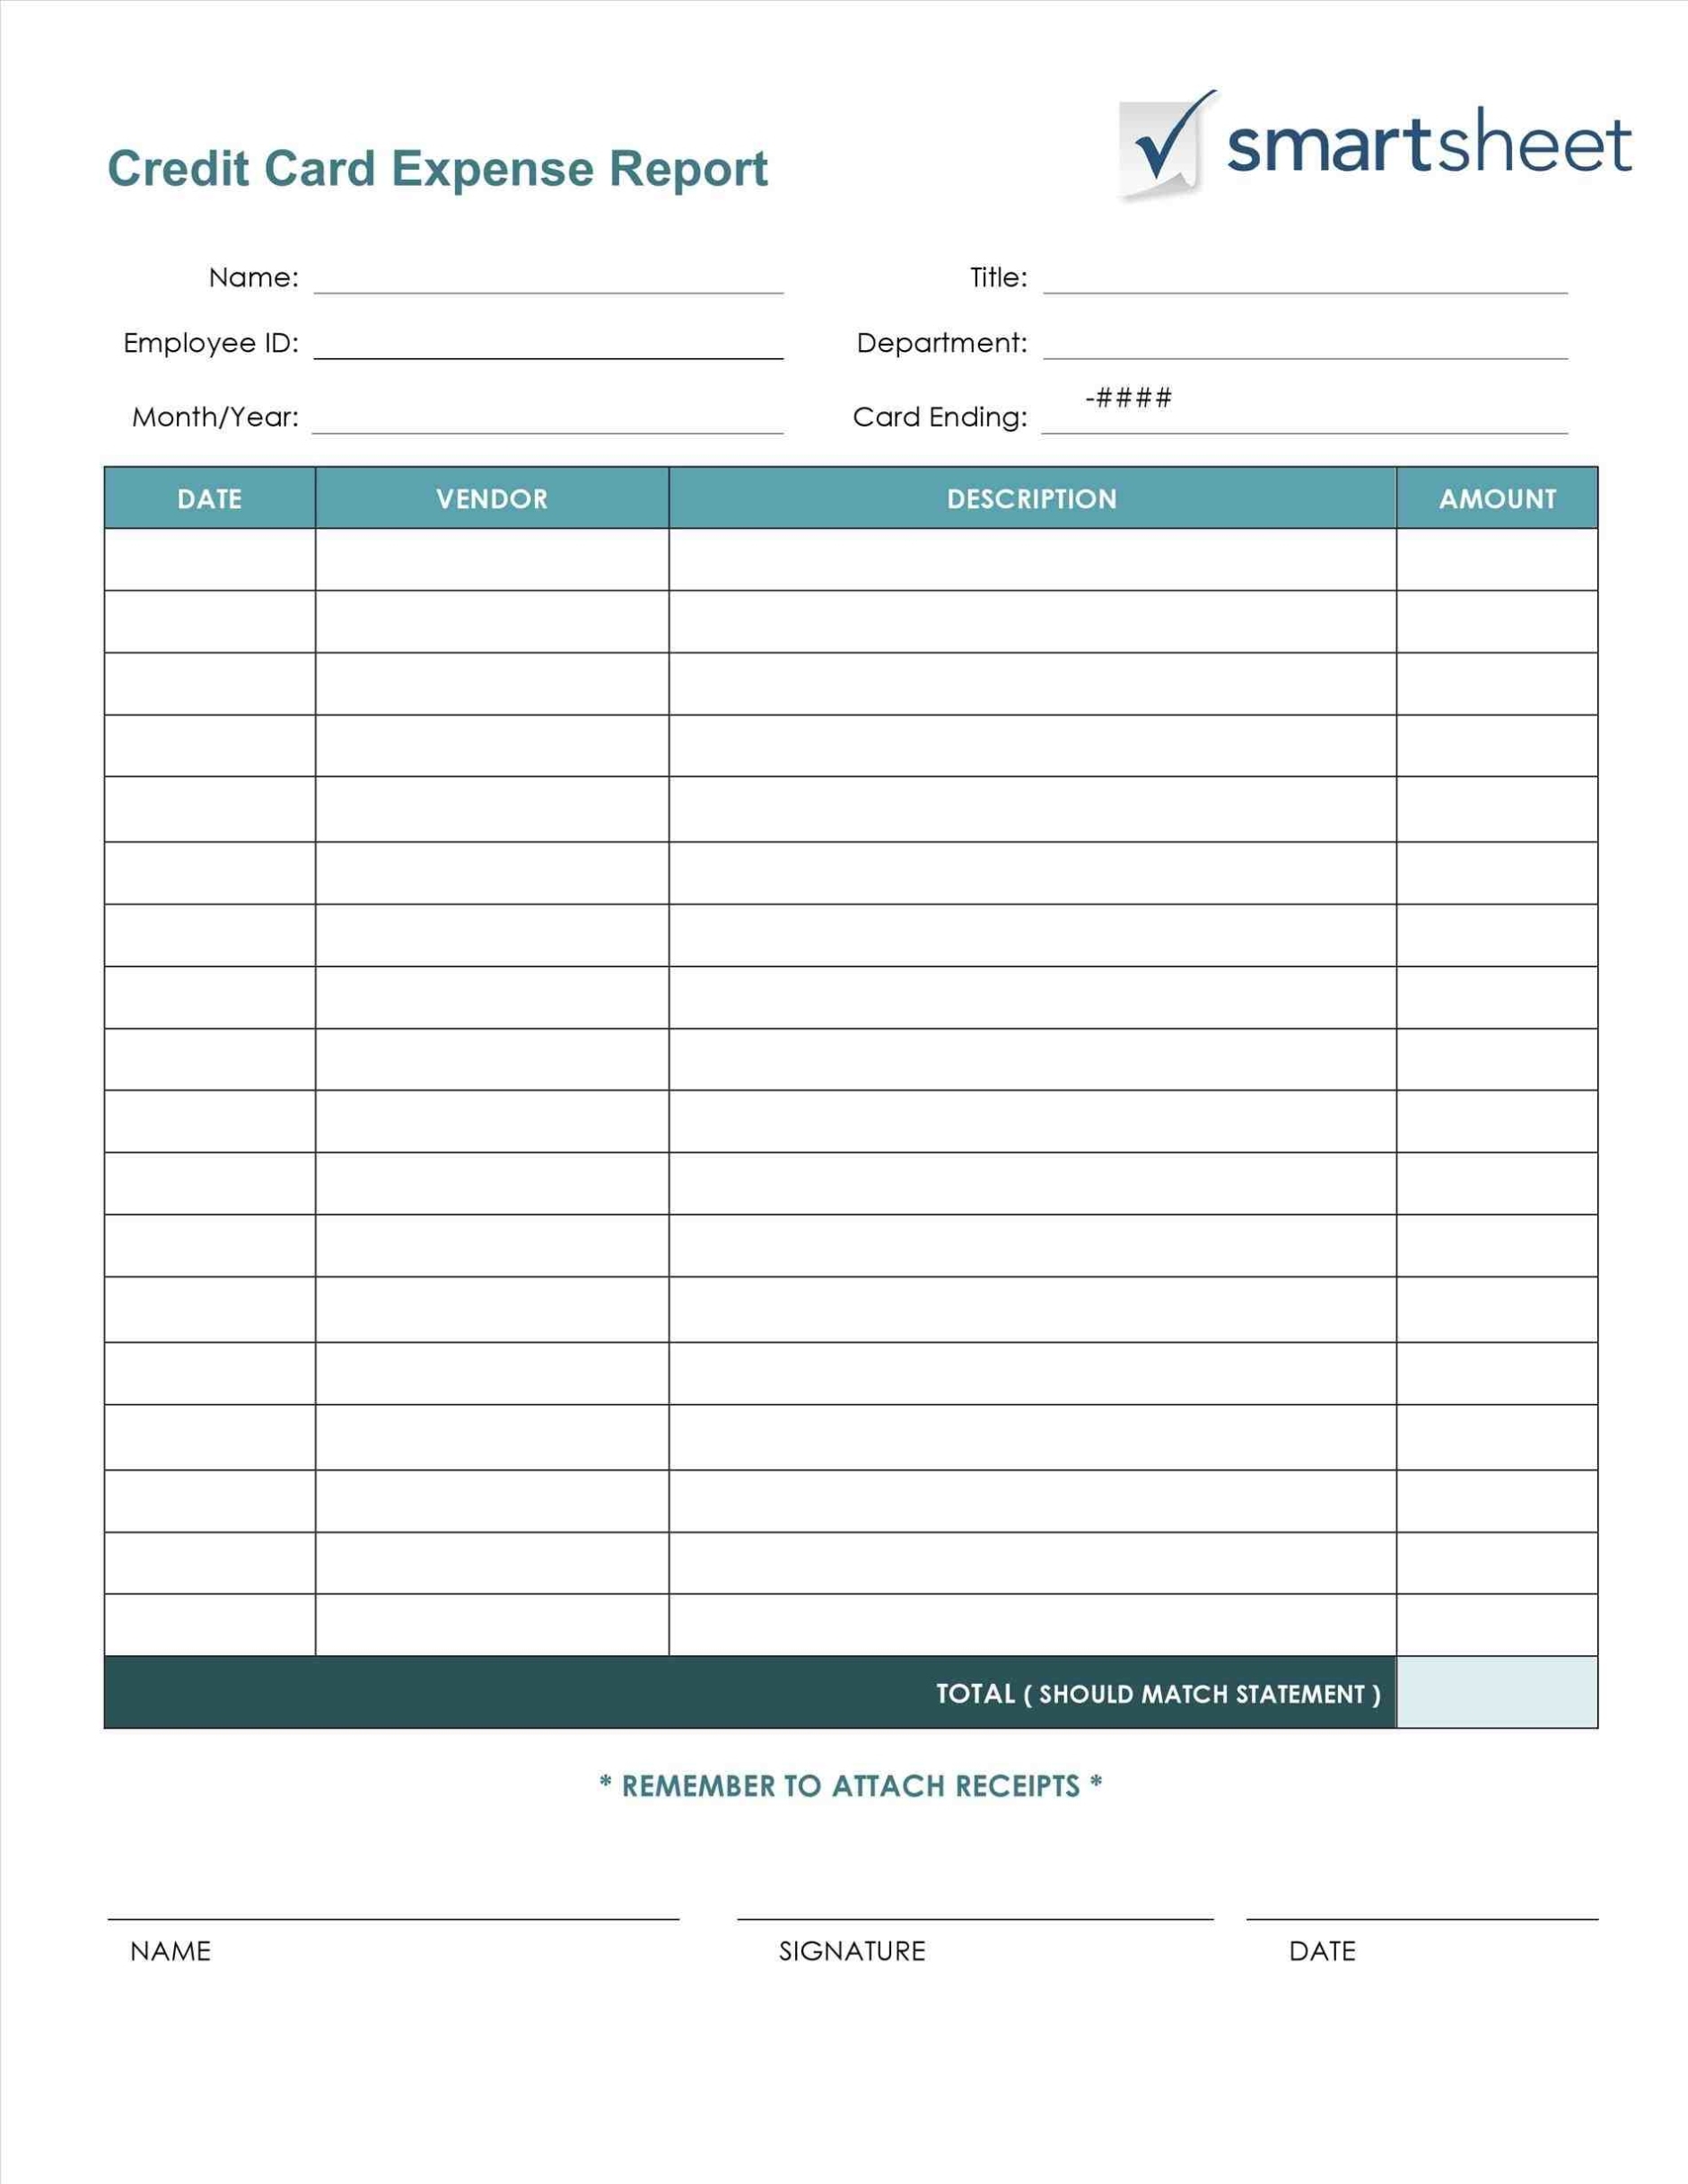 Monthly Financial Report Excel Template - Sample Templates - Sample Templates With Excel Financial Report Templates